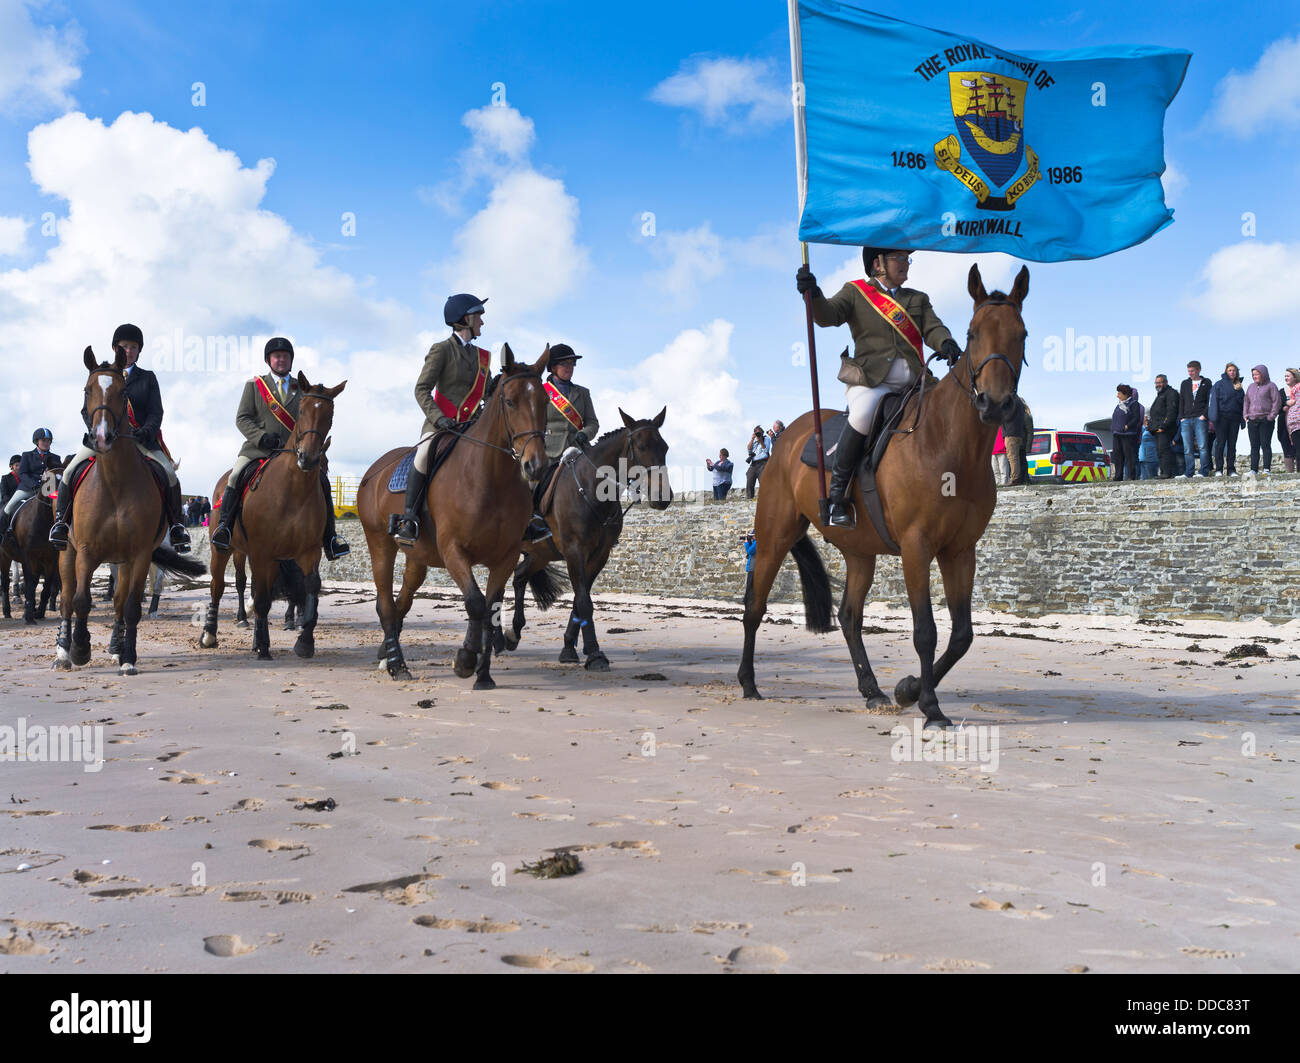 dh Scapa Beach SCAPA ORKNEY Riding of the Marches horses Royal burgh of Kirkwall flag people orkneys islands Stock Photo